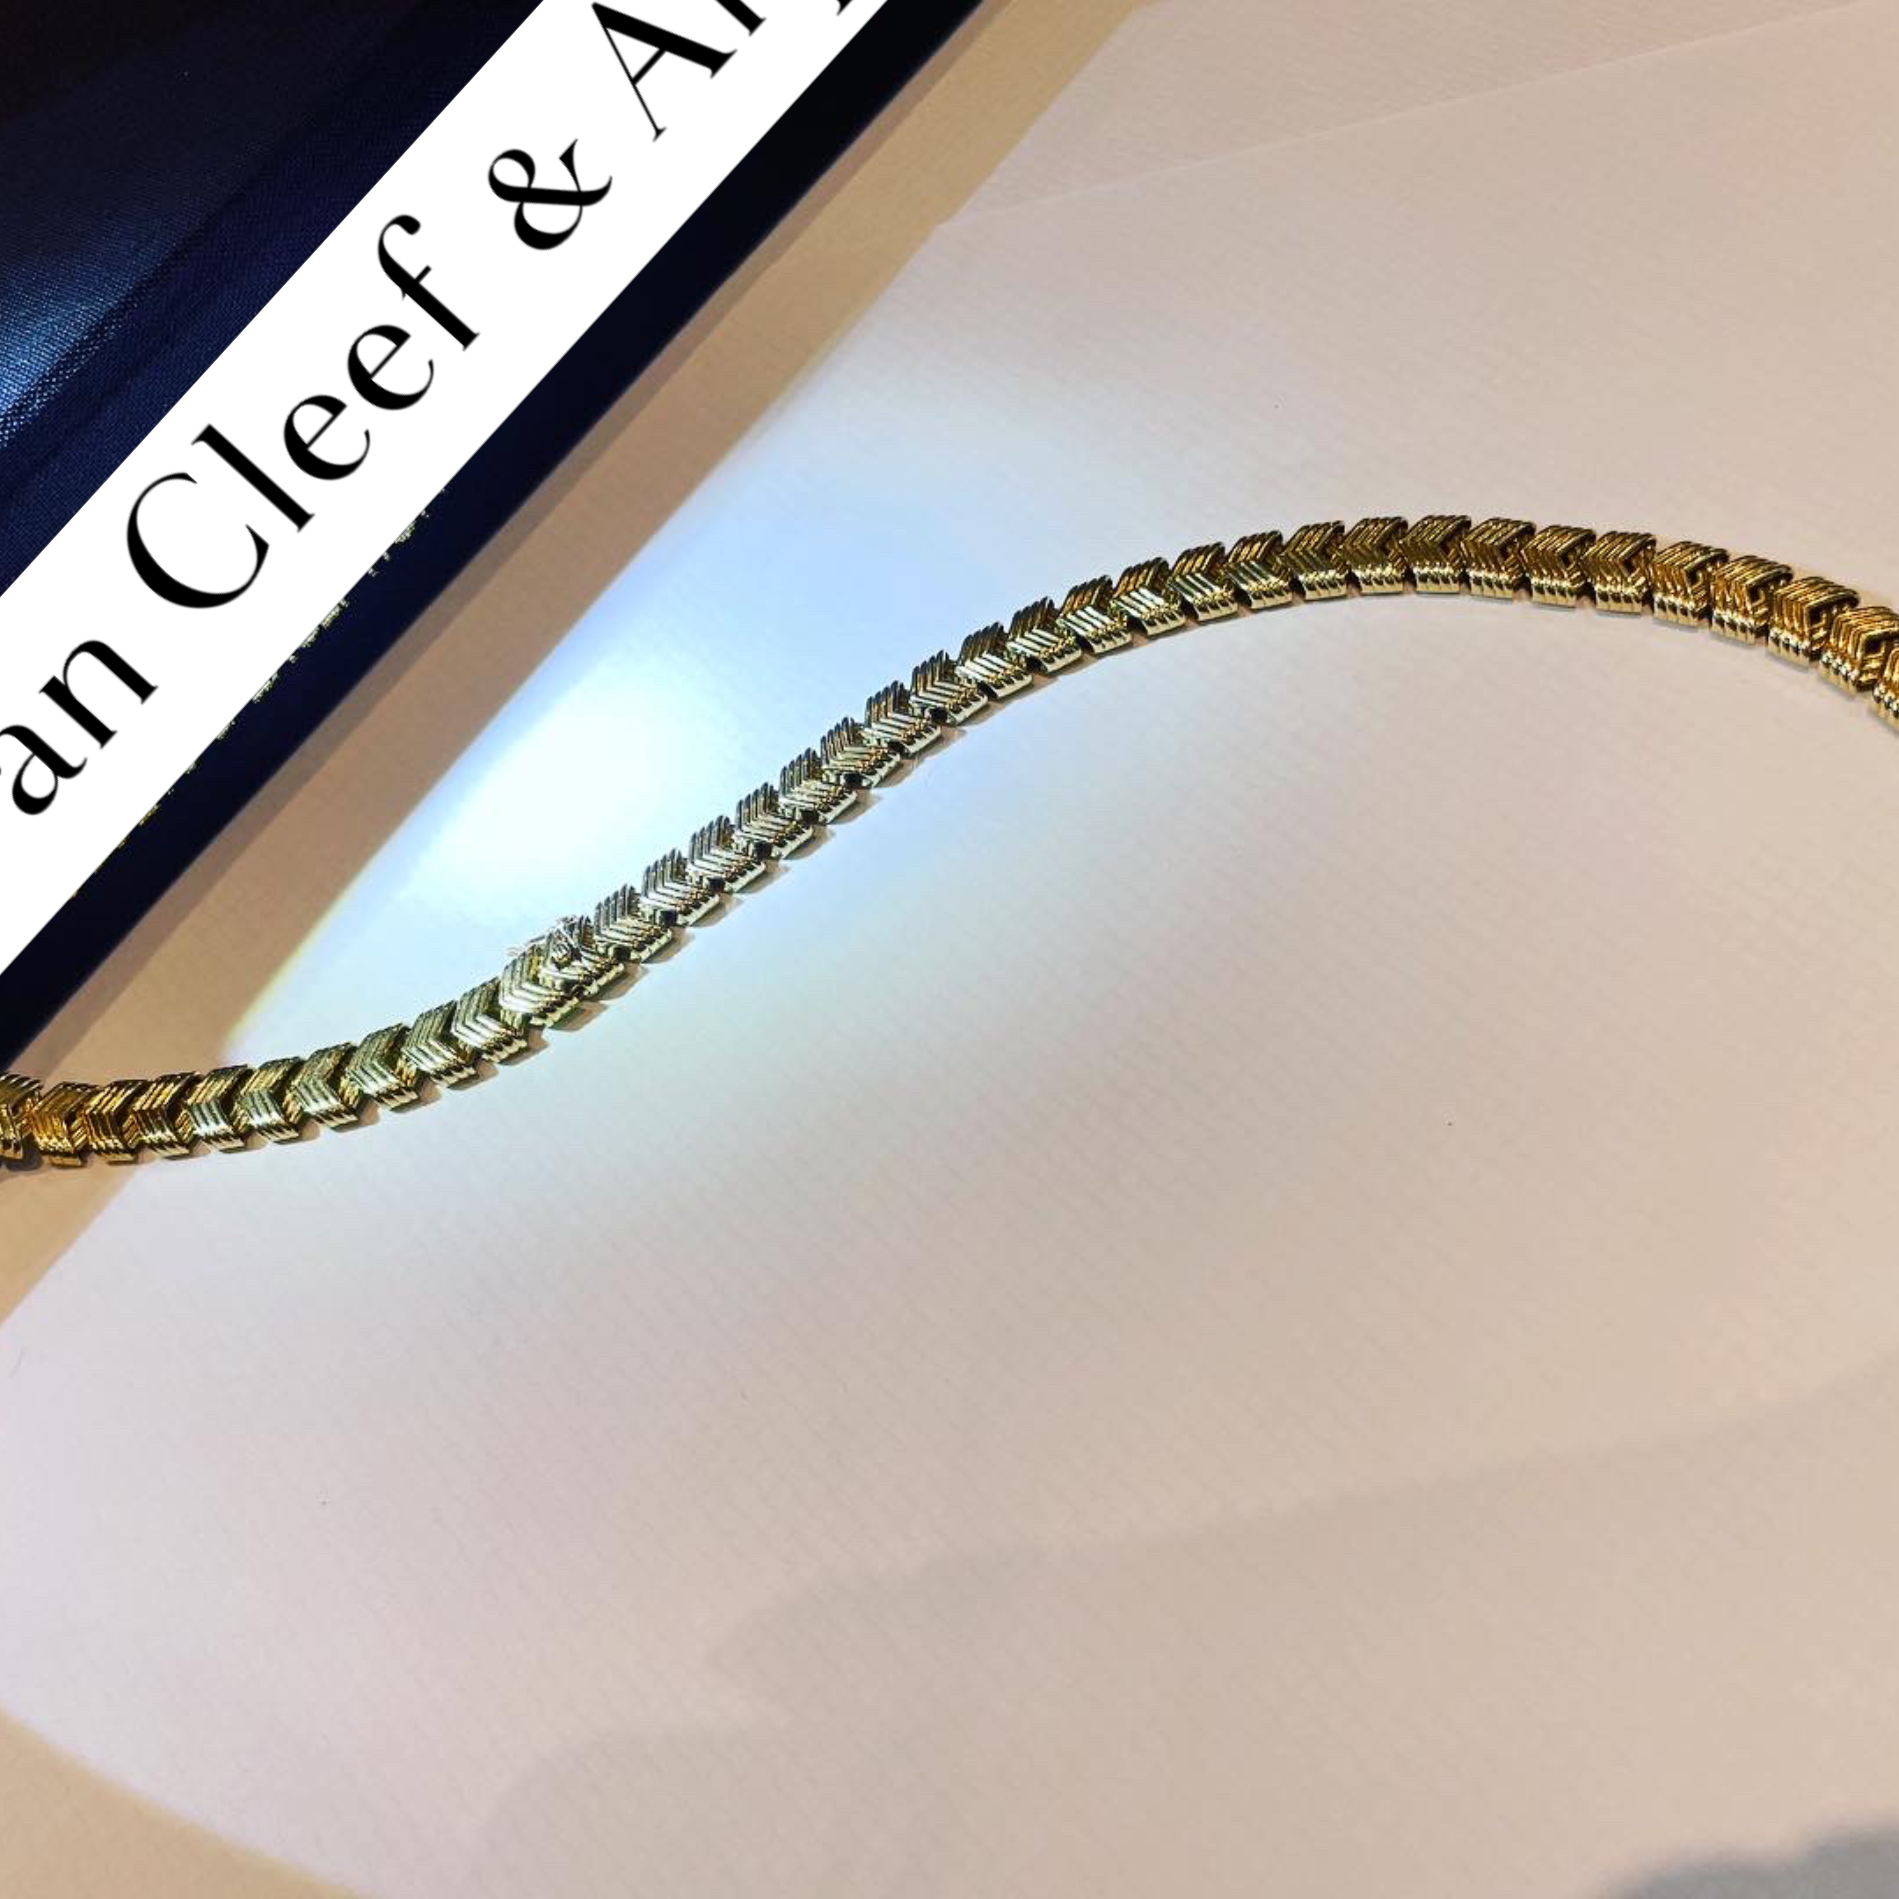 Van Cleef & Arpels French 1950s 18KT Yellow Gold Link Bracelets front